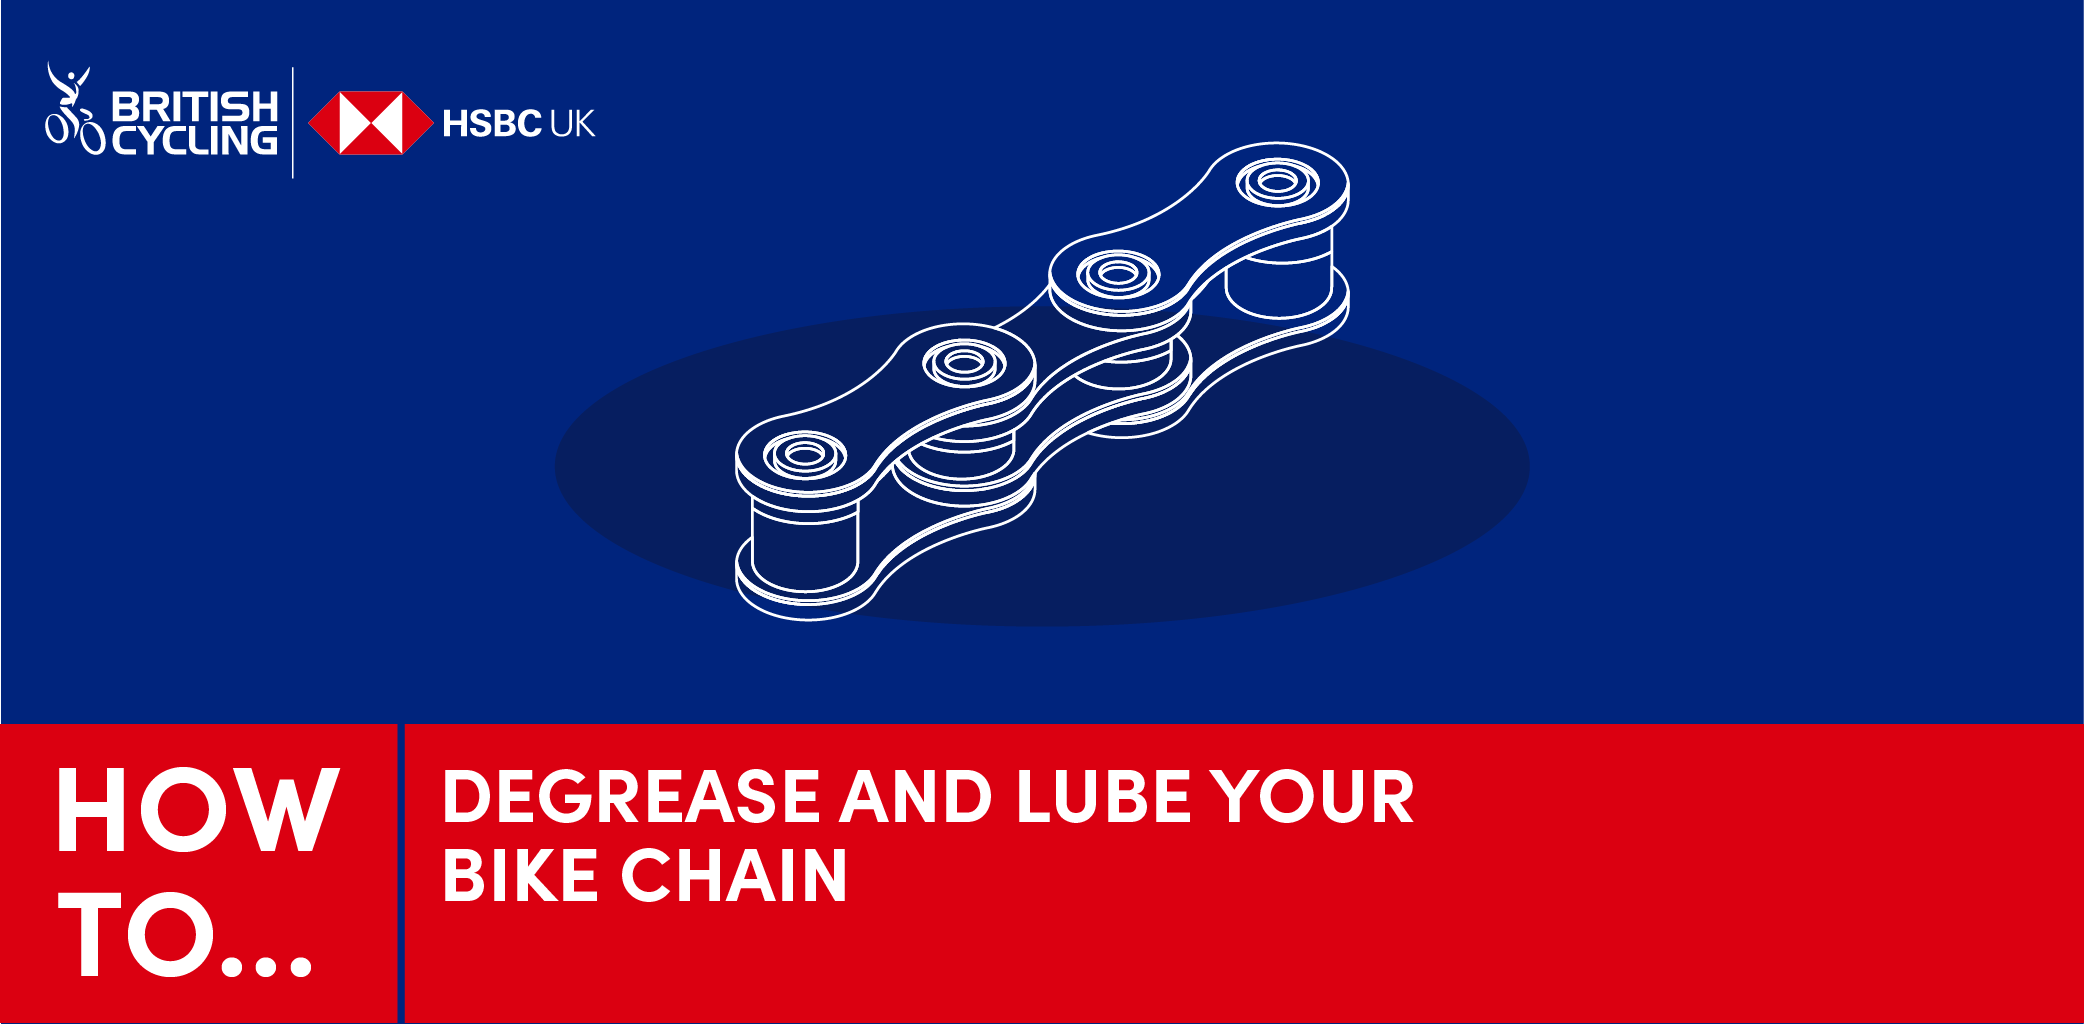 How to... degrease and lube your bike chain